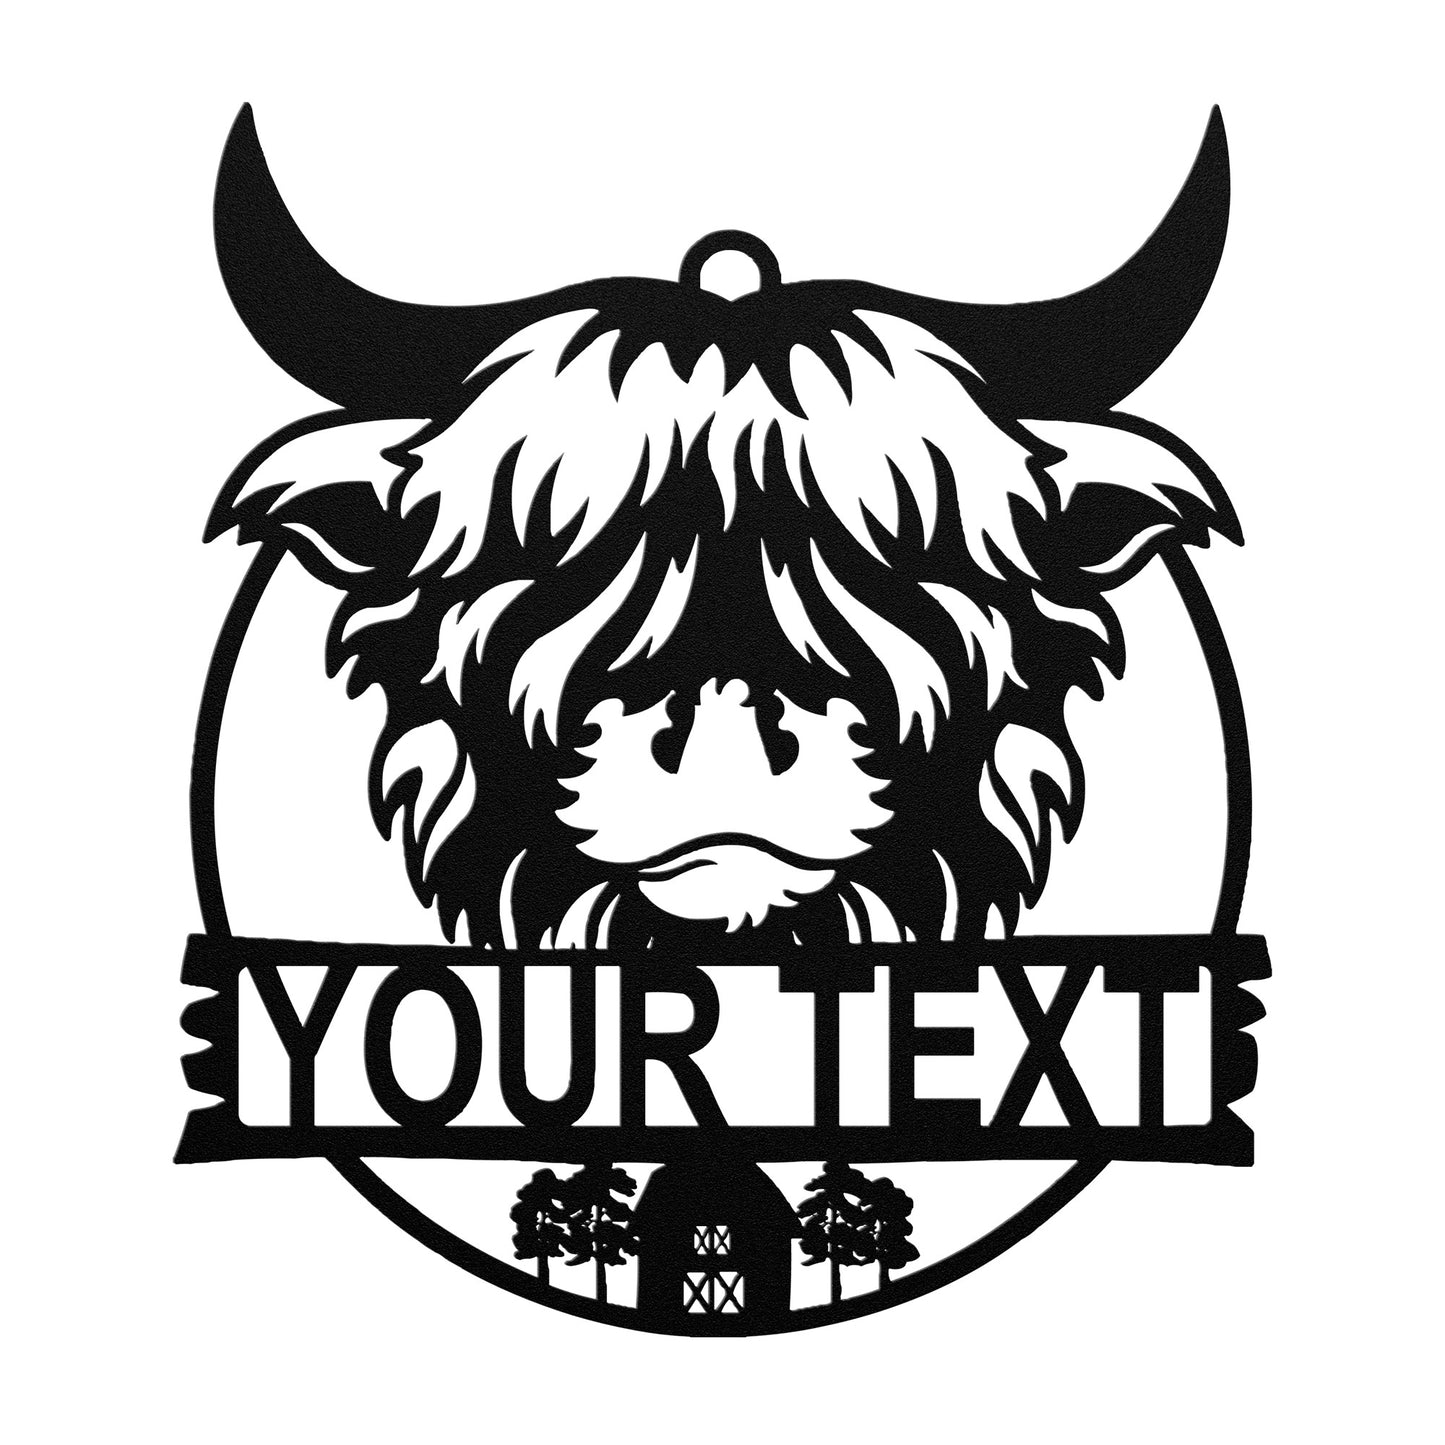 Personalized Custom Text Highland Cow Metal Art | Rustic Wall Decor